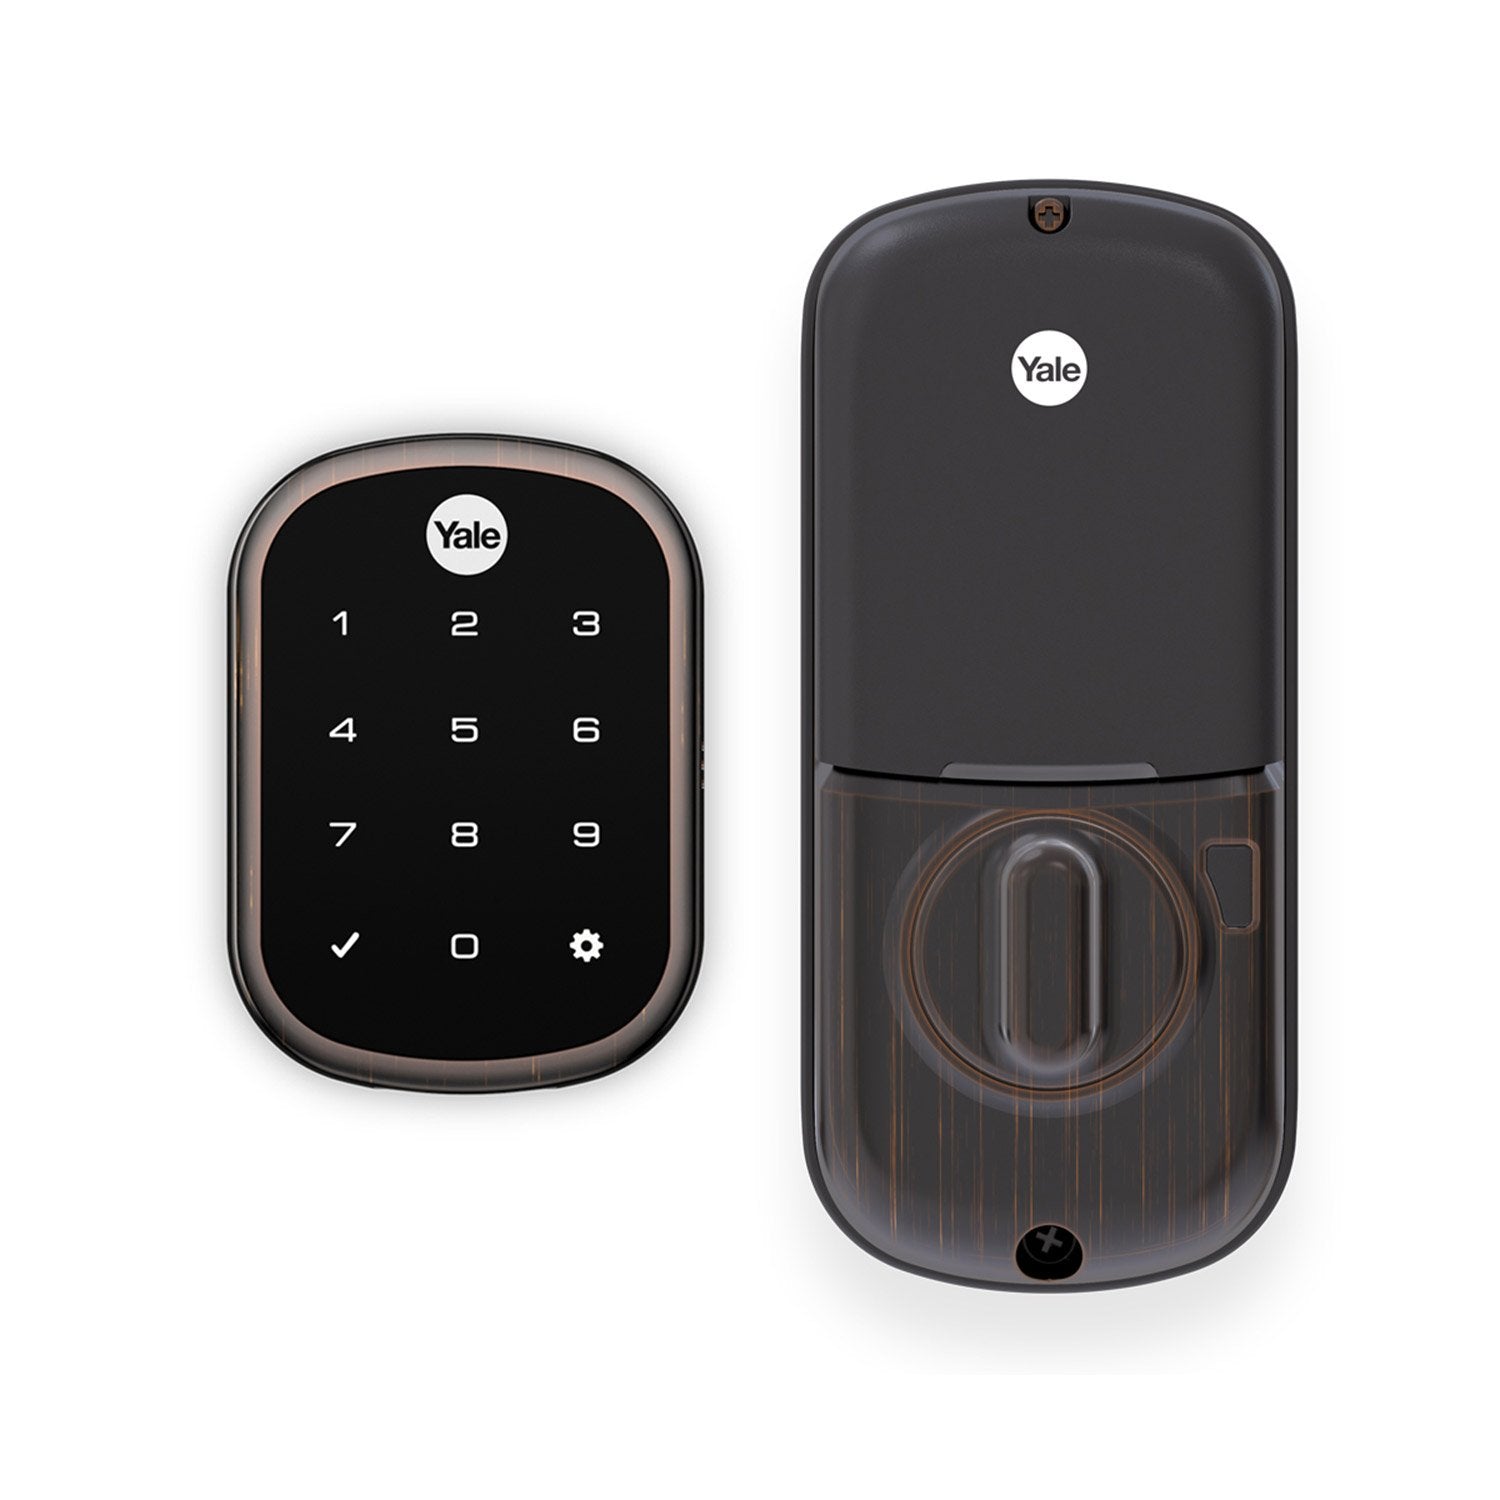 Yale Real Living Assure Lock SL With Z-Wave Plus (for Works with Ring Alarm Security System) - Oil-Rubbed Bronze:Yale Real Living Assure Lock SL With Z-Wave Plus (for Works with Ring Alarm Security System)